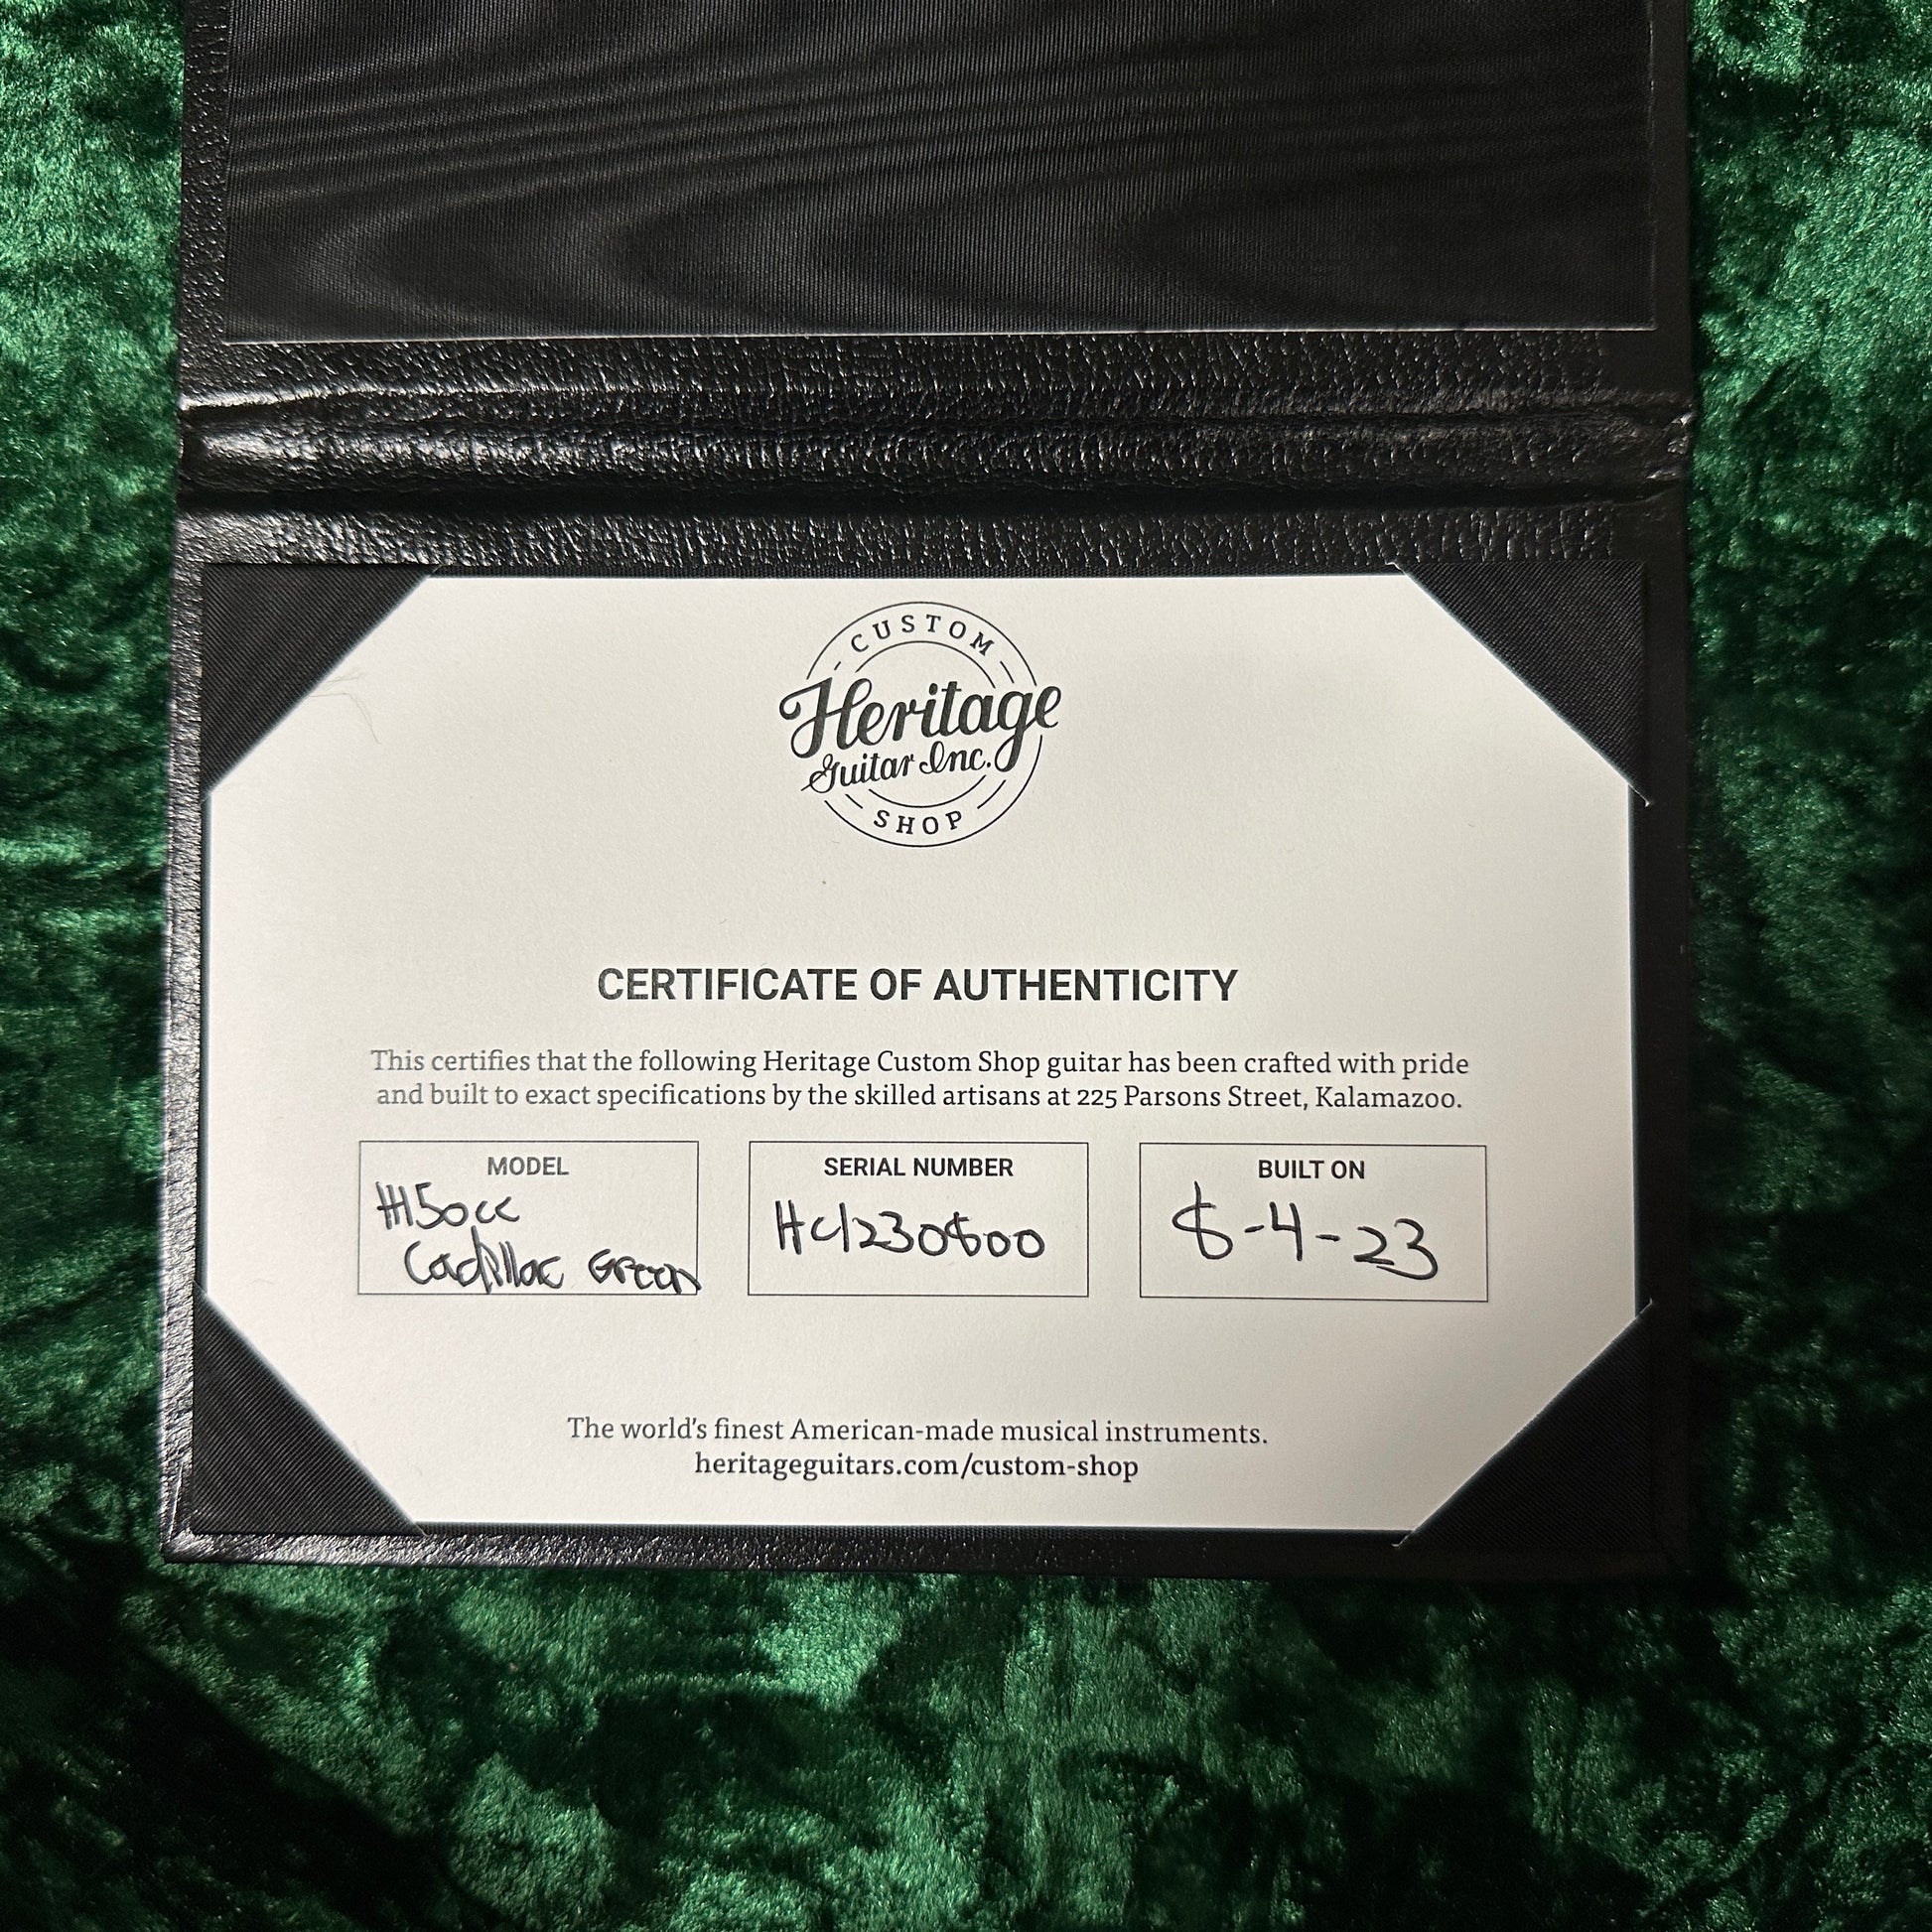 Certificate of authenticity for Used Heritage H-150CC Cadillac Green.